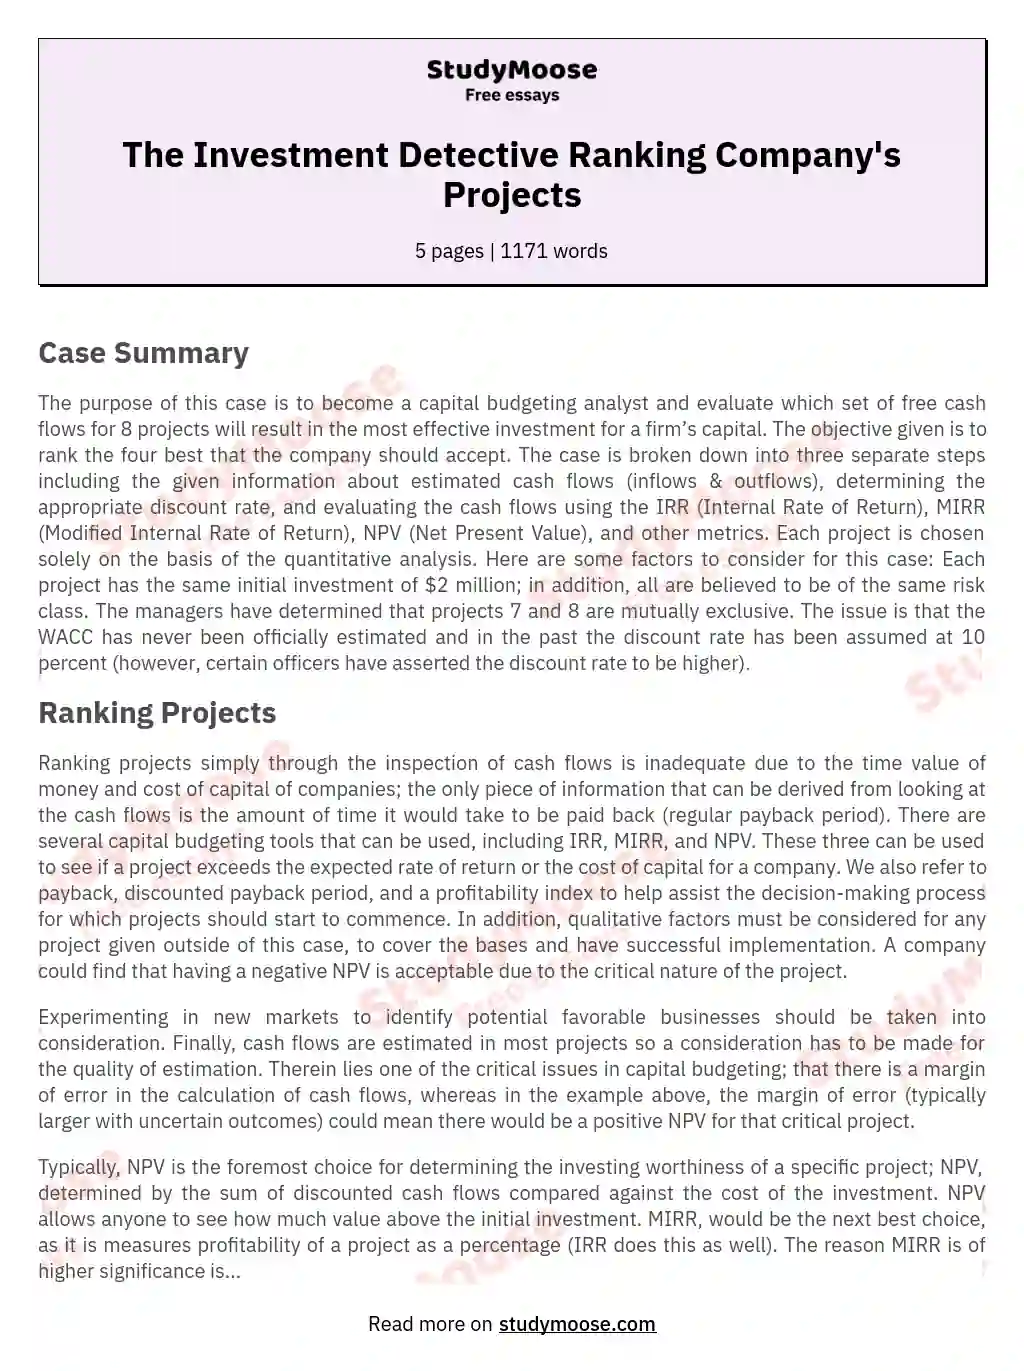 The Investment Detective Ranking Company's Projects essay